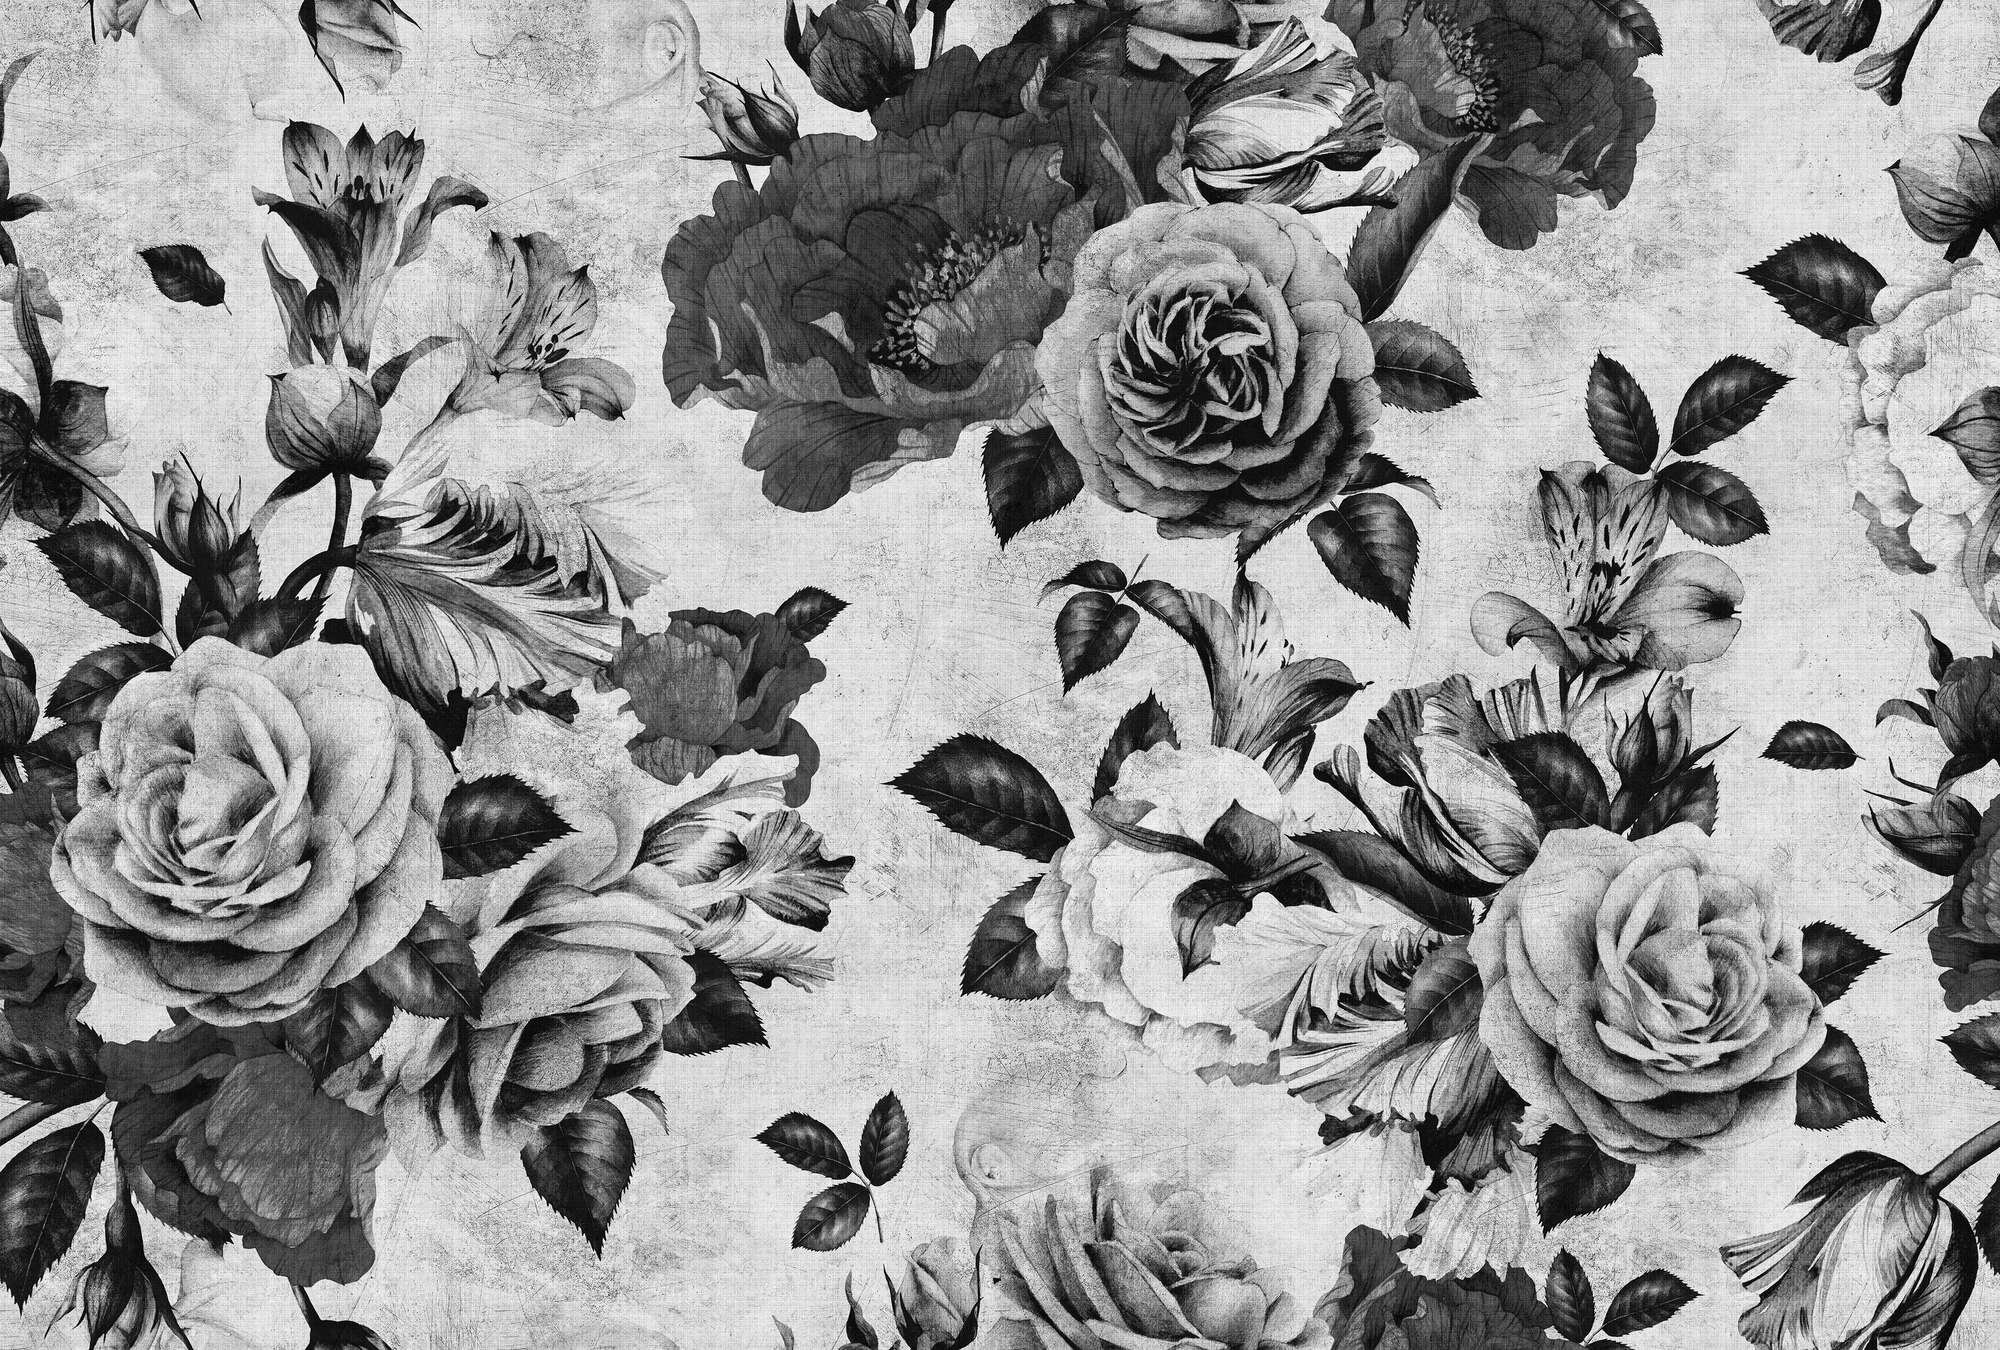             Spanish rose 1 - Rose wallpaper with black and white flowers in natural linen structure - grey, black | mother-of-pearl smooth fleece
        